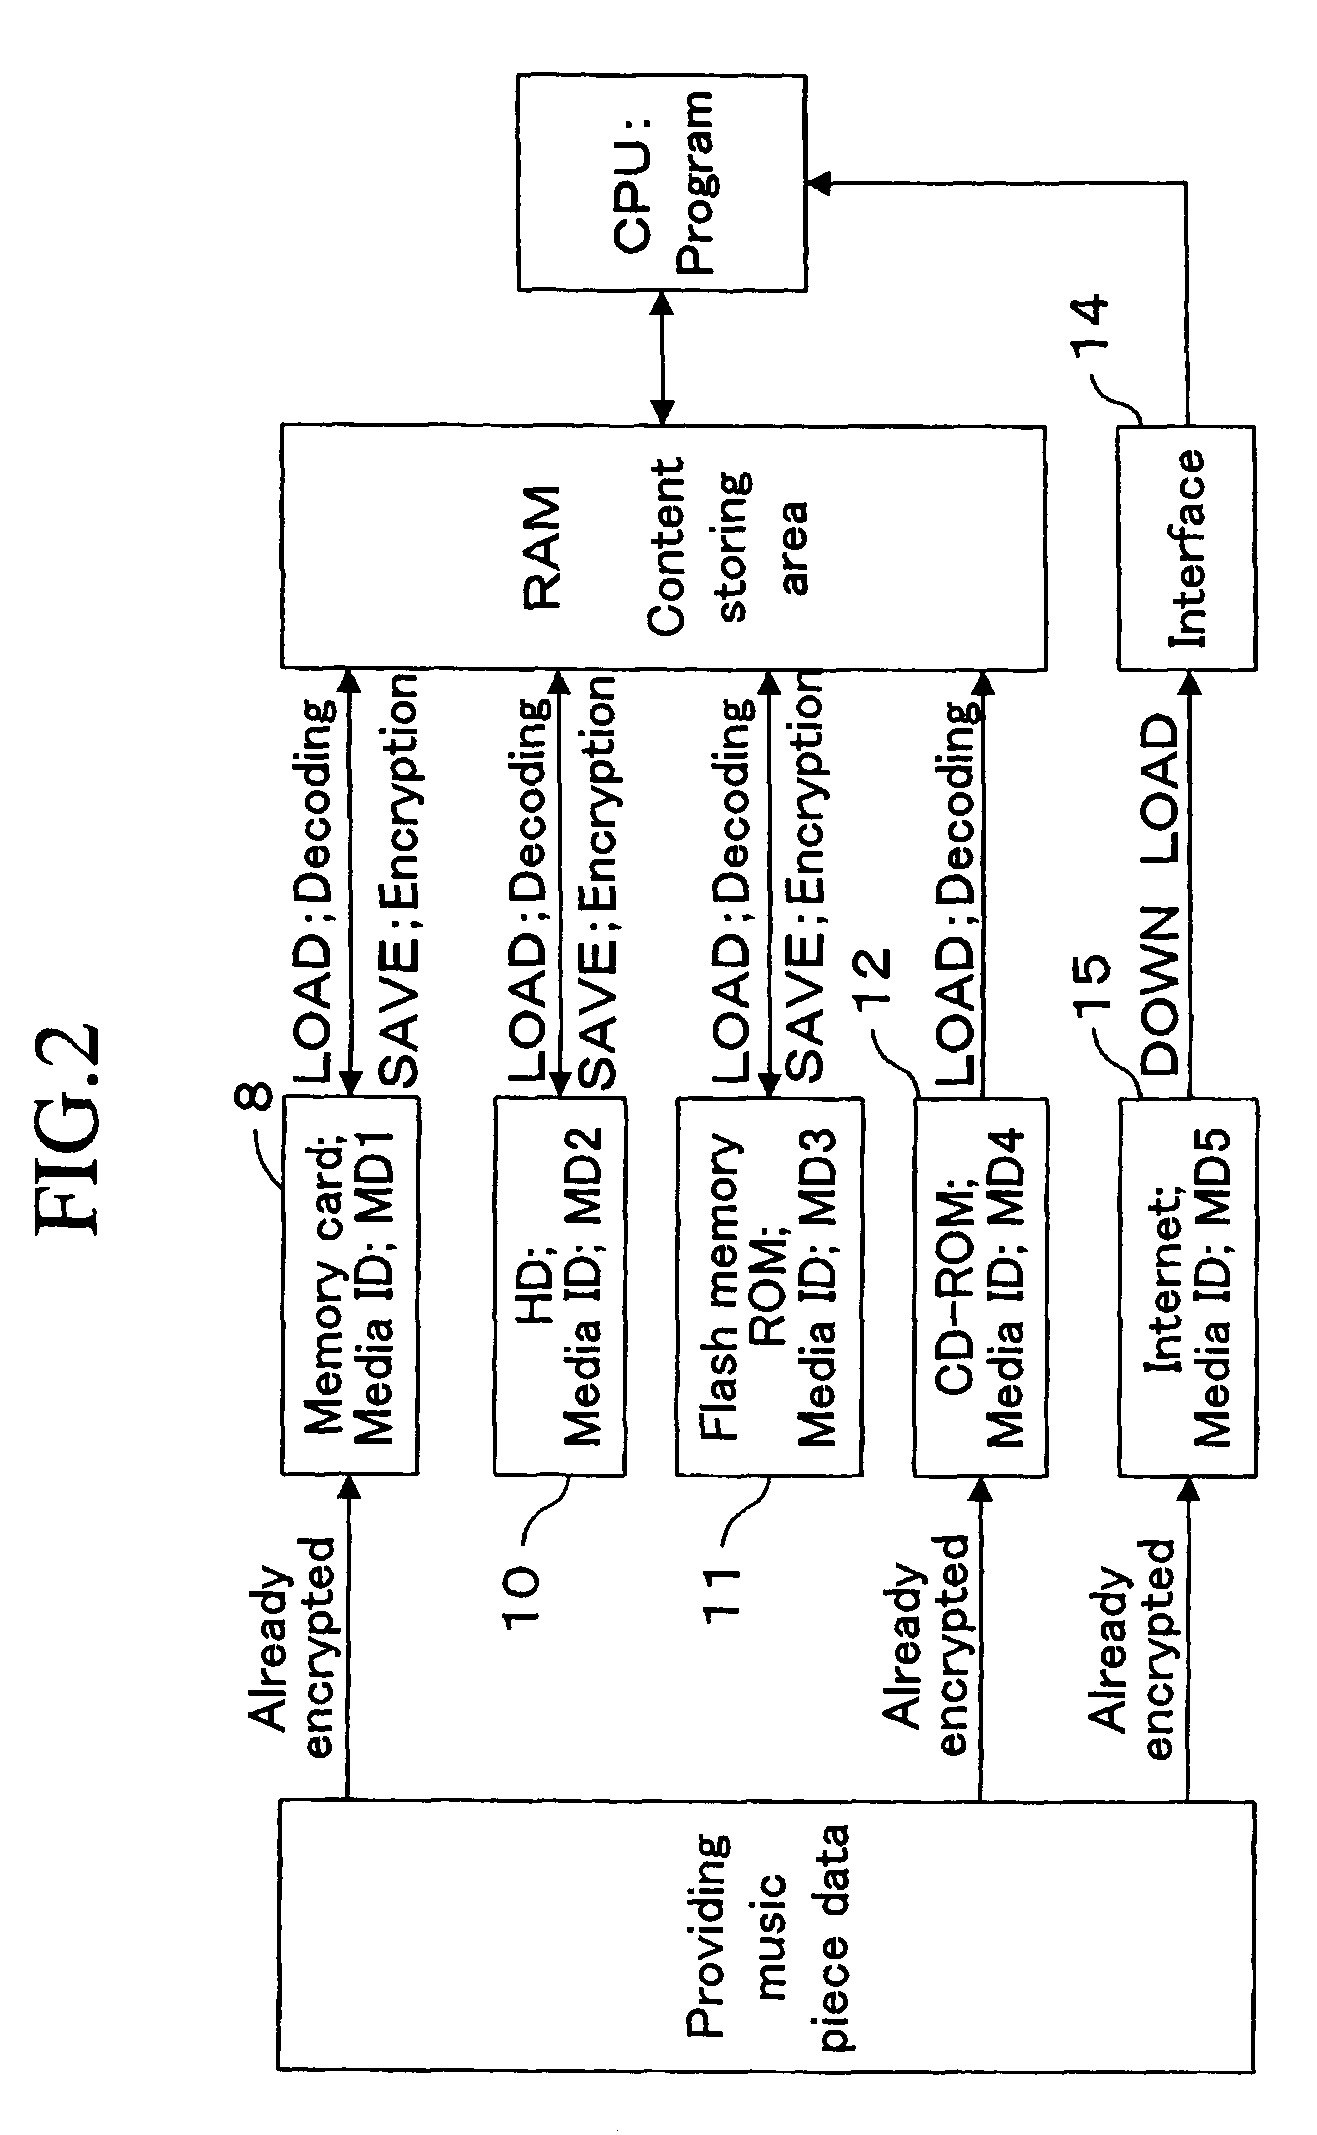 Electronic musical apparatus for recording and reproducing music content